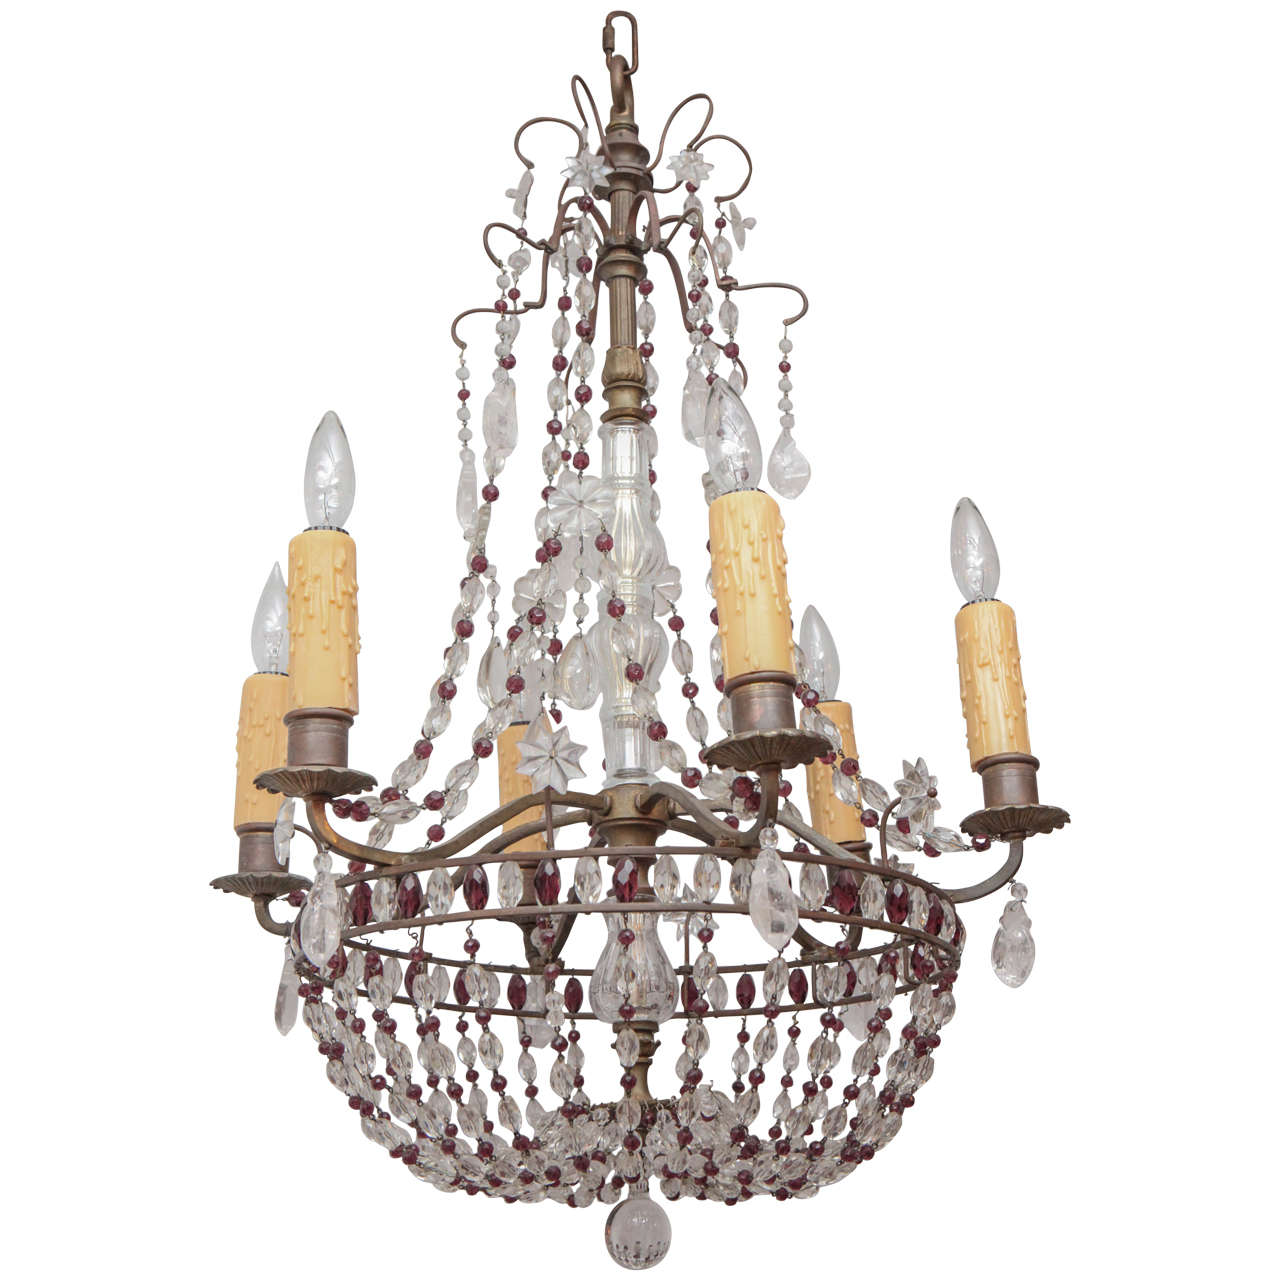 1900s French Bronze Beaded Chandelier with Amethyst and Rock Crystal